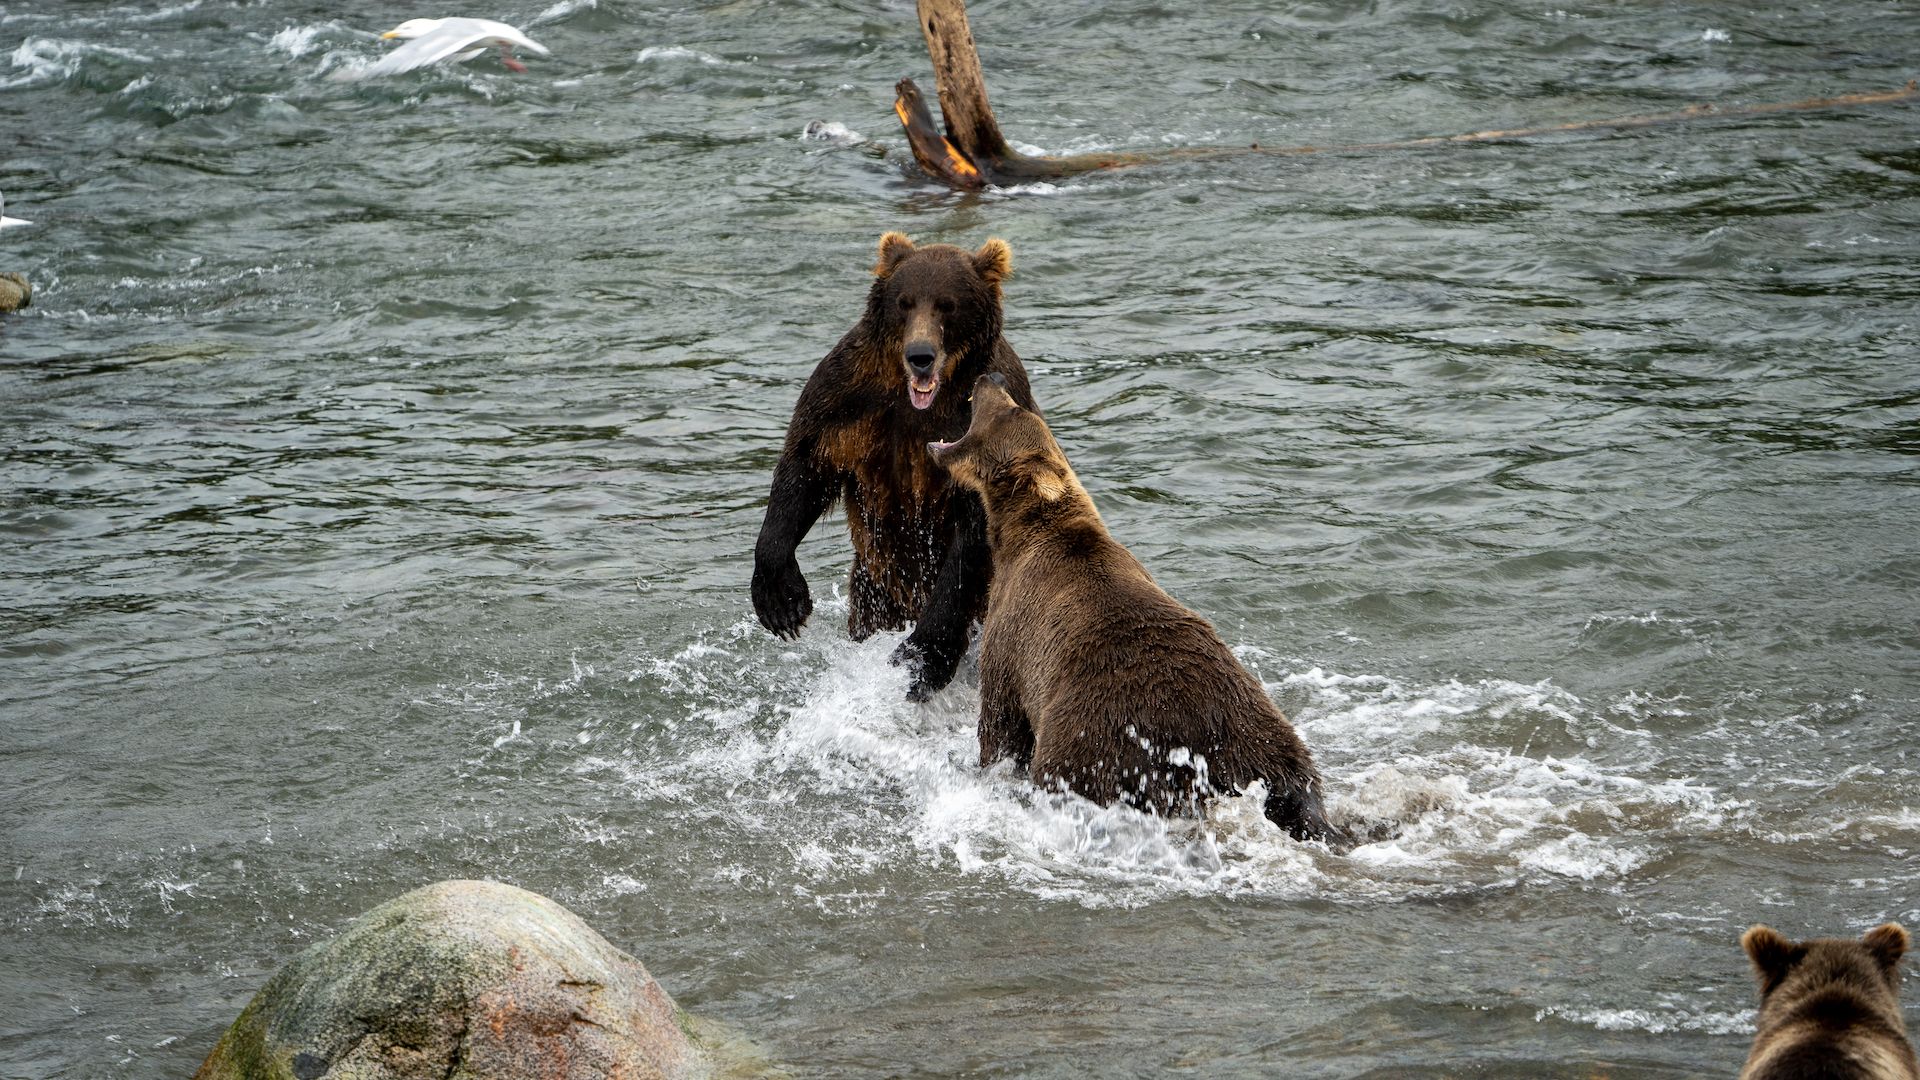 The strongest bears claim the best fishing spots on the river